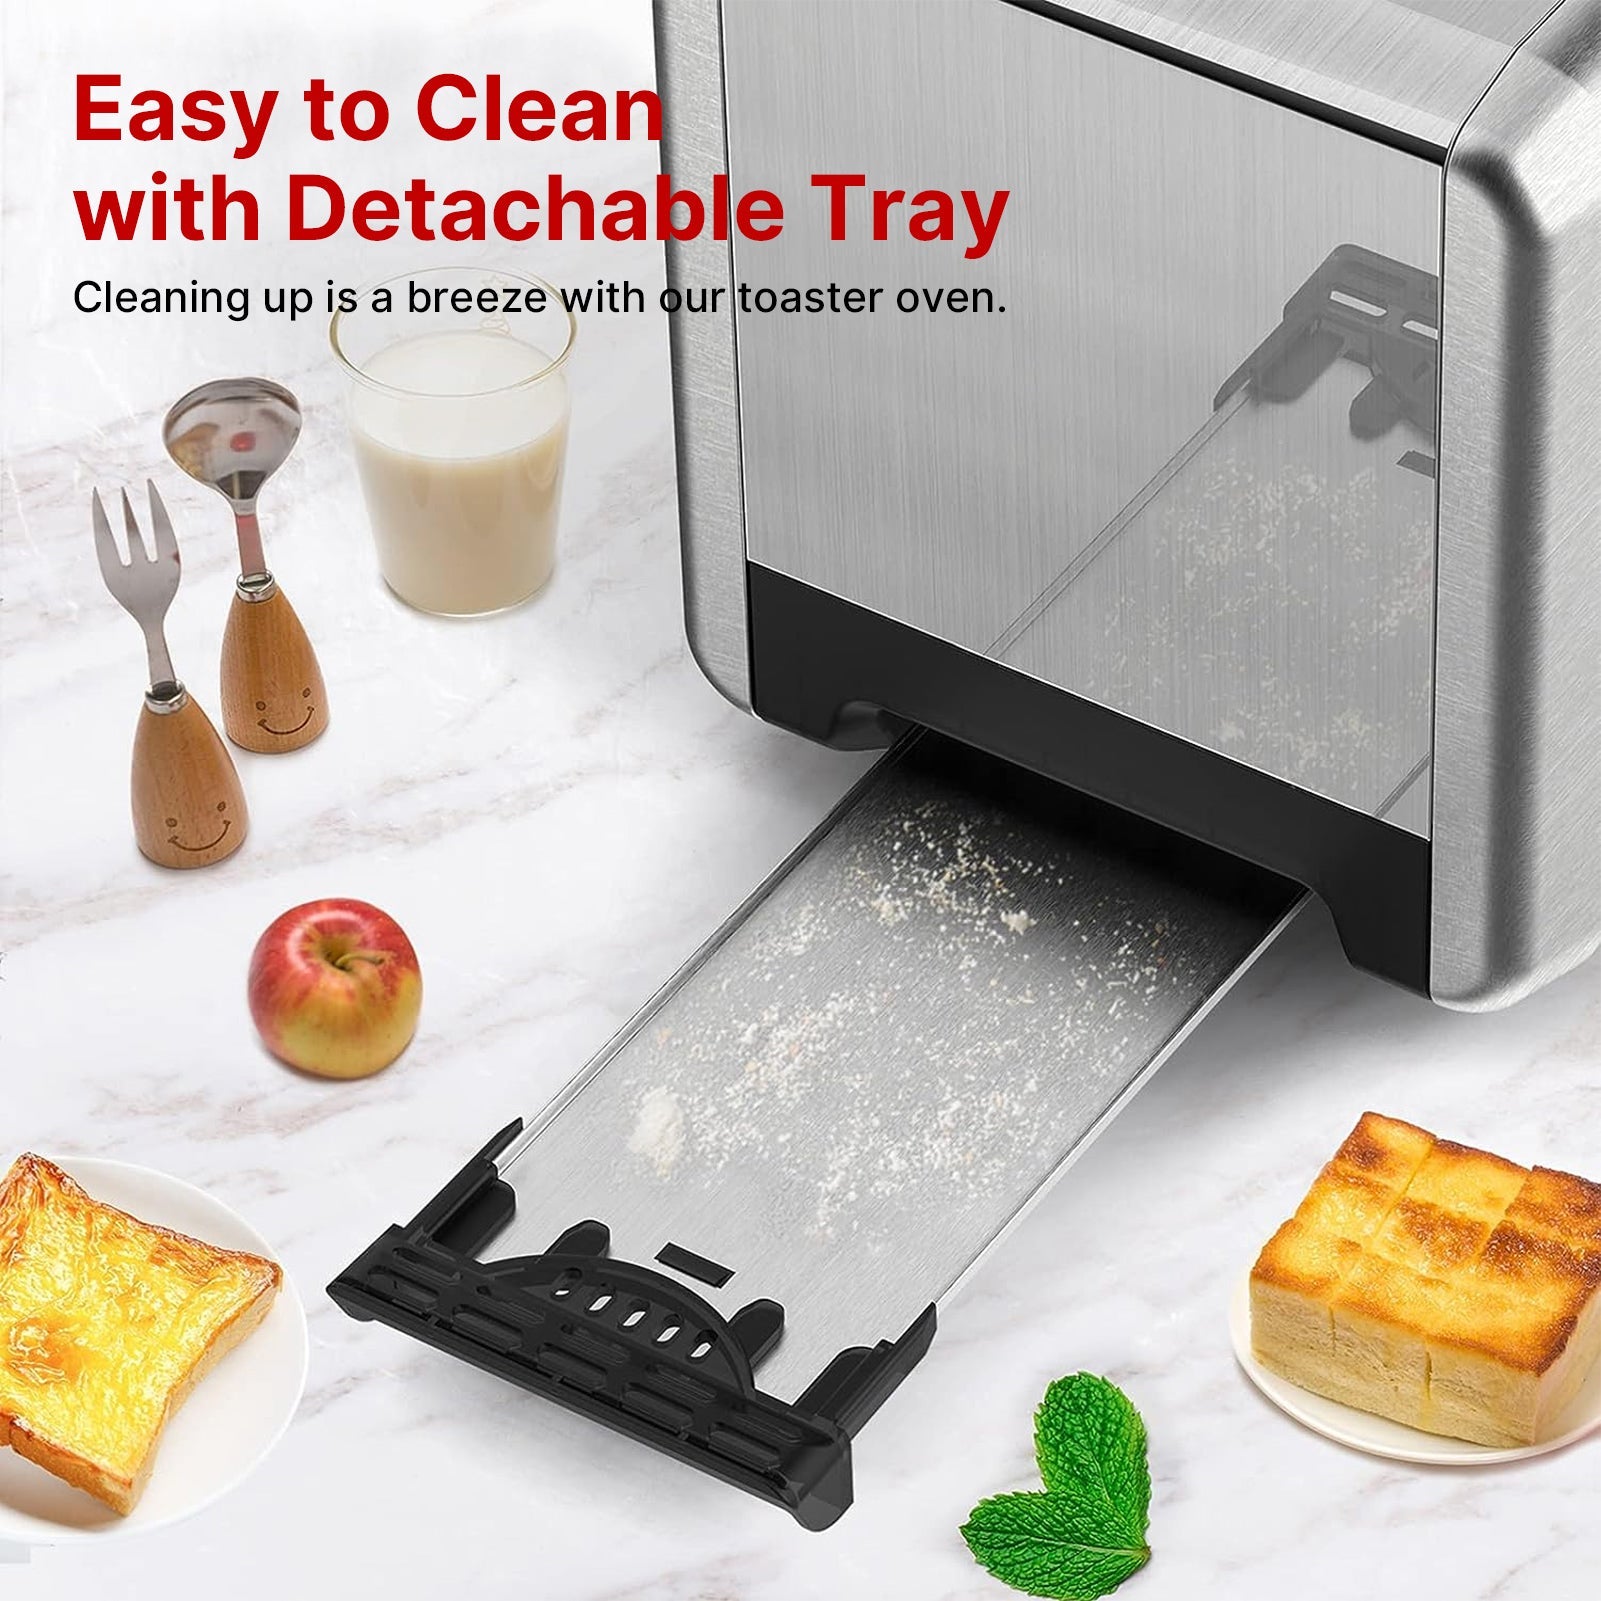 WHALL Touch Screen Toaster 2 slice, Stainless Steel Digital Timer Toaster with Sound Function, Smart Extra Wide Slots Toaster with Bagel, Cancel, Defrost, 6 Bread Types & 6 Shade Settings